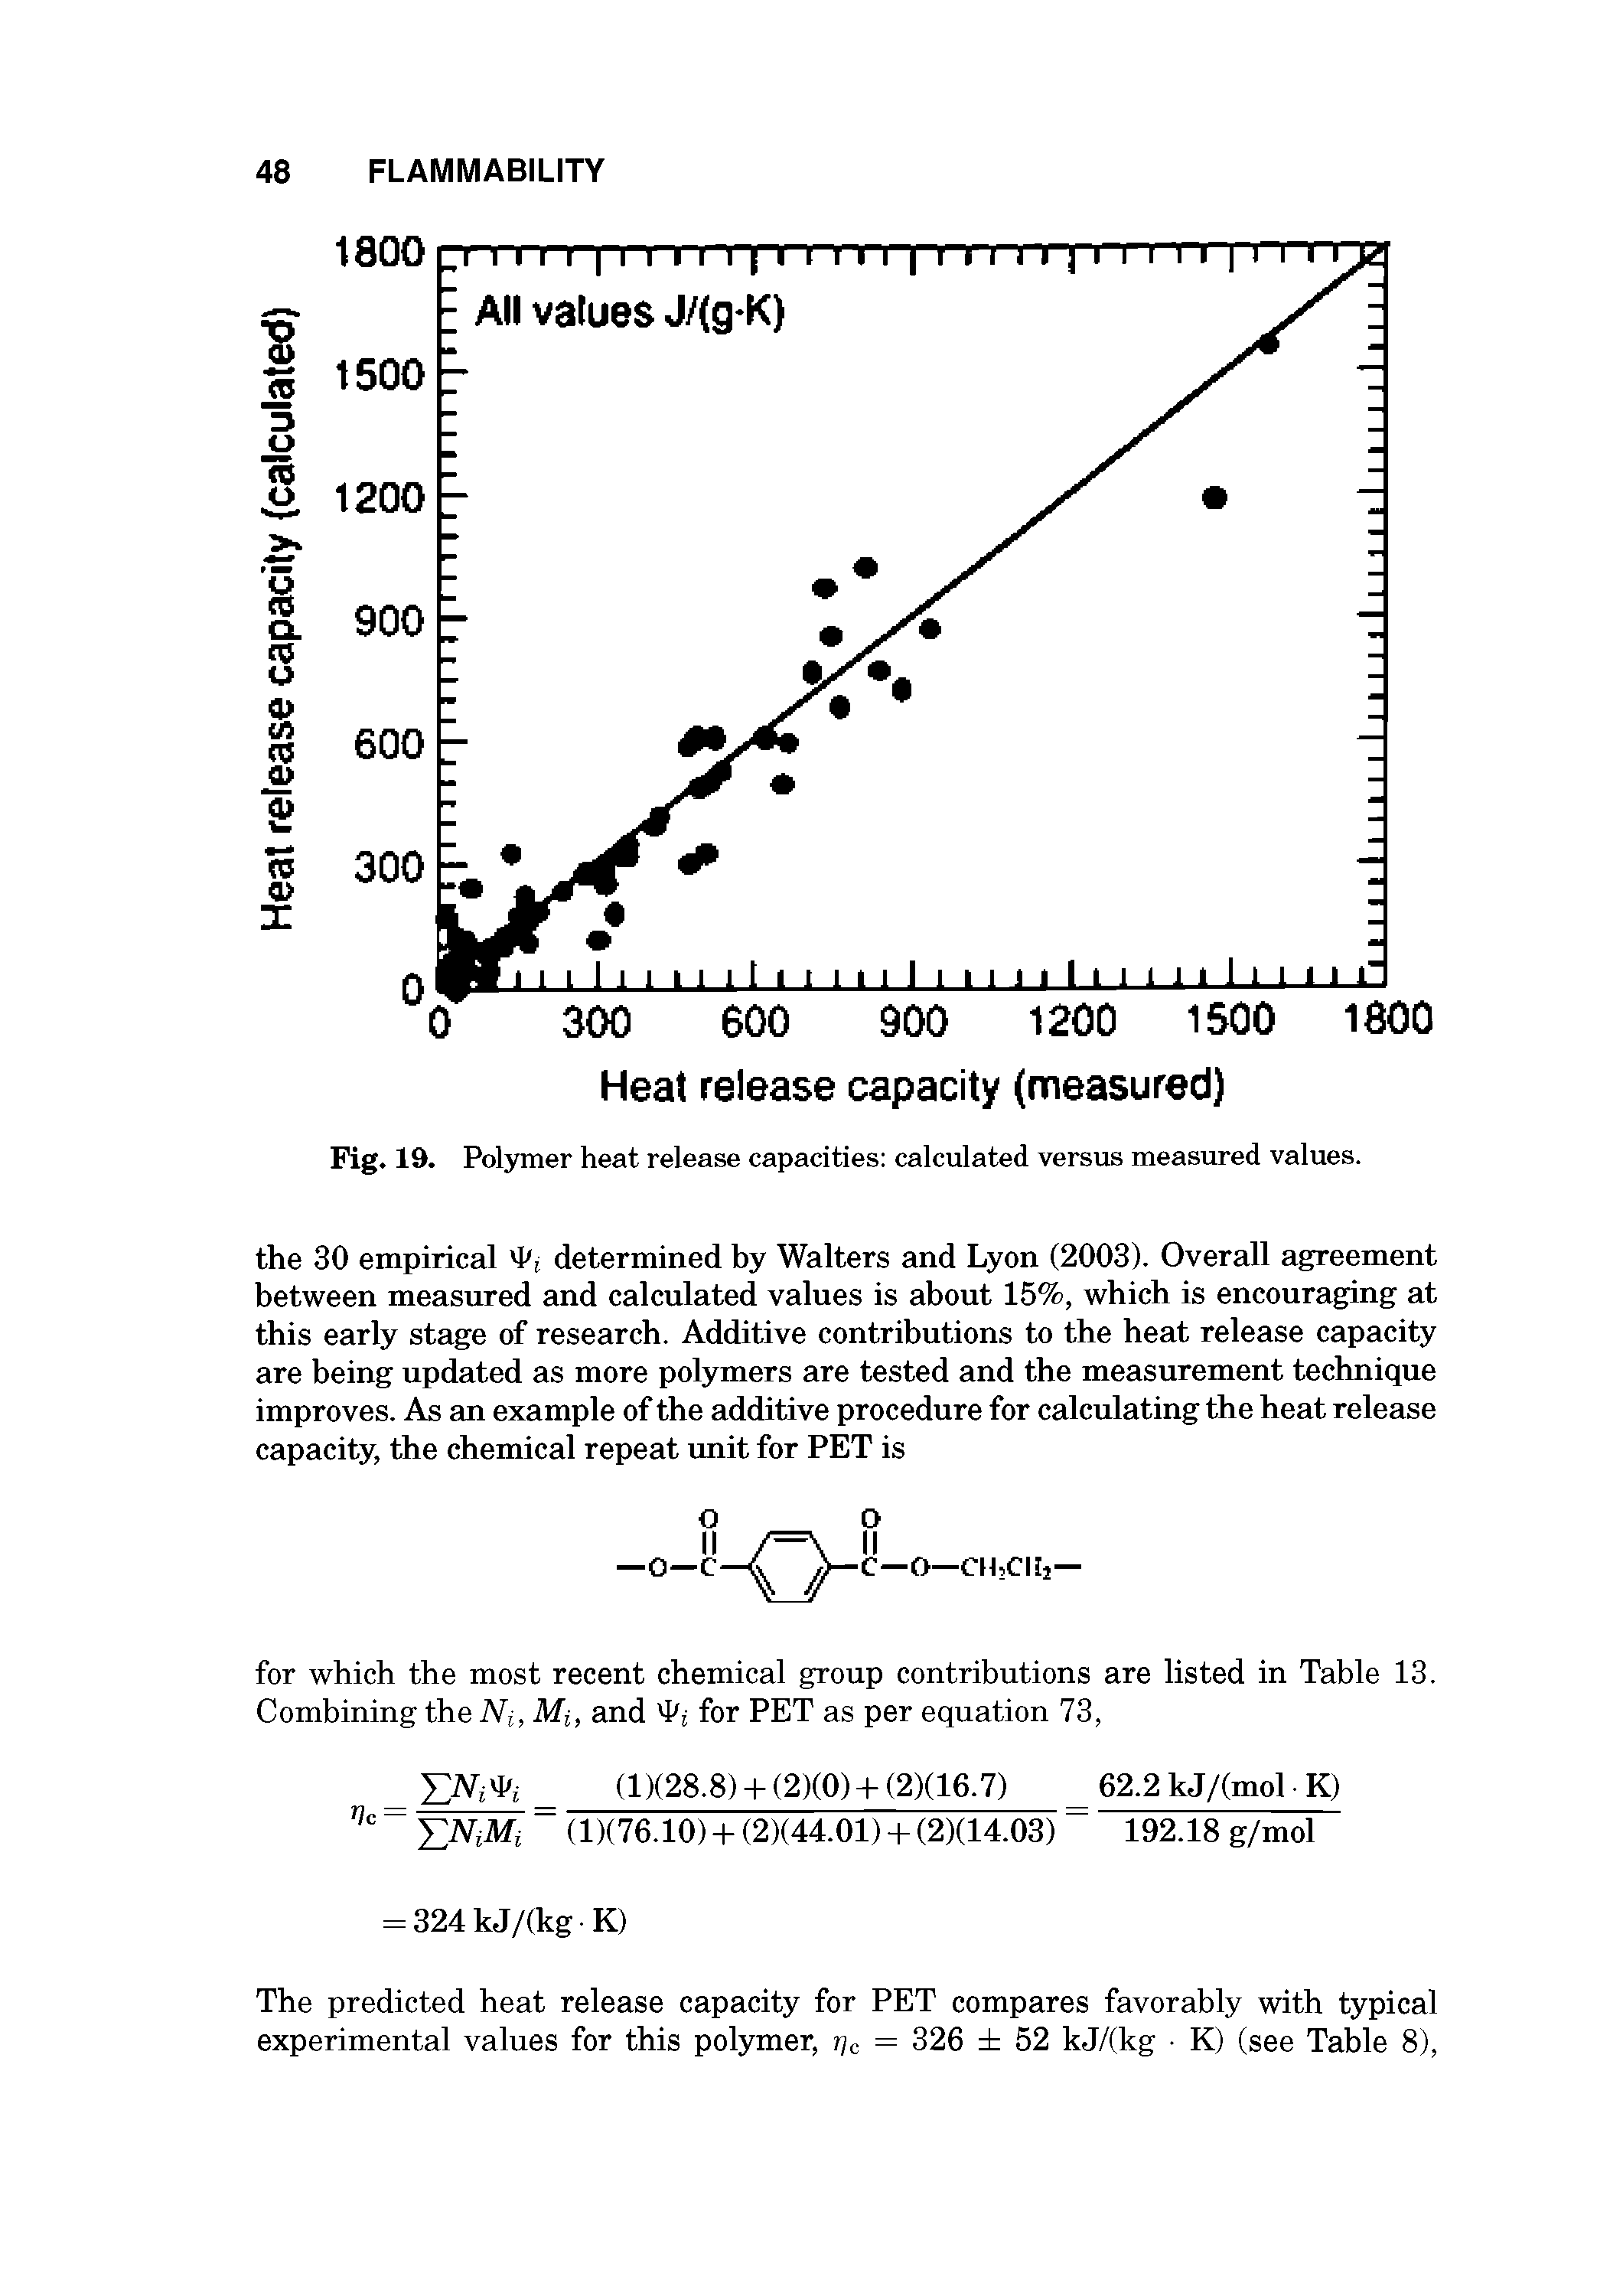 Fig. 19. Polymer heat release capacities calculated versus measured values.